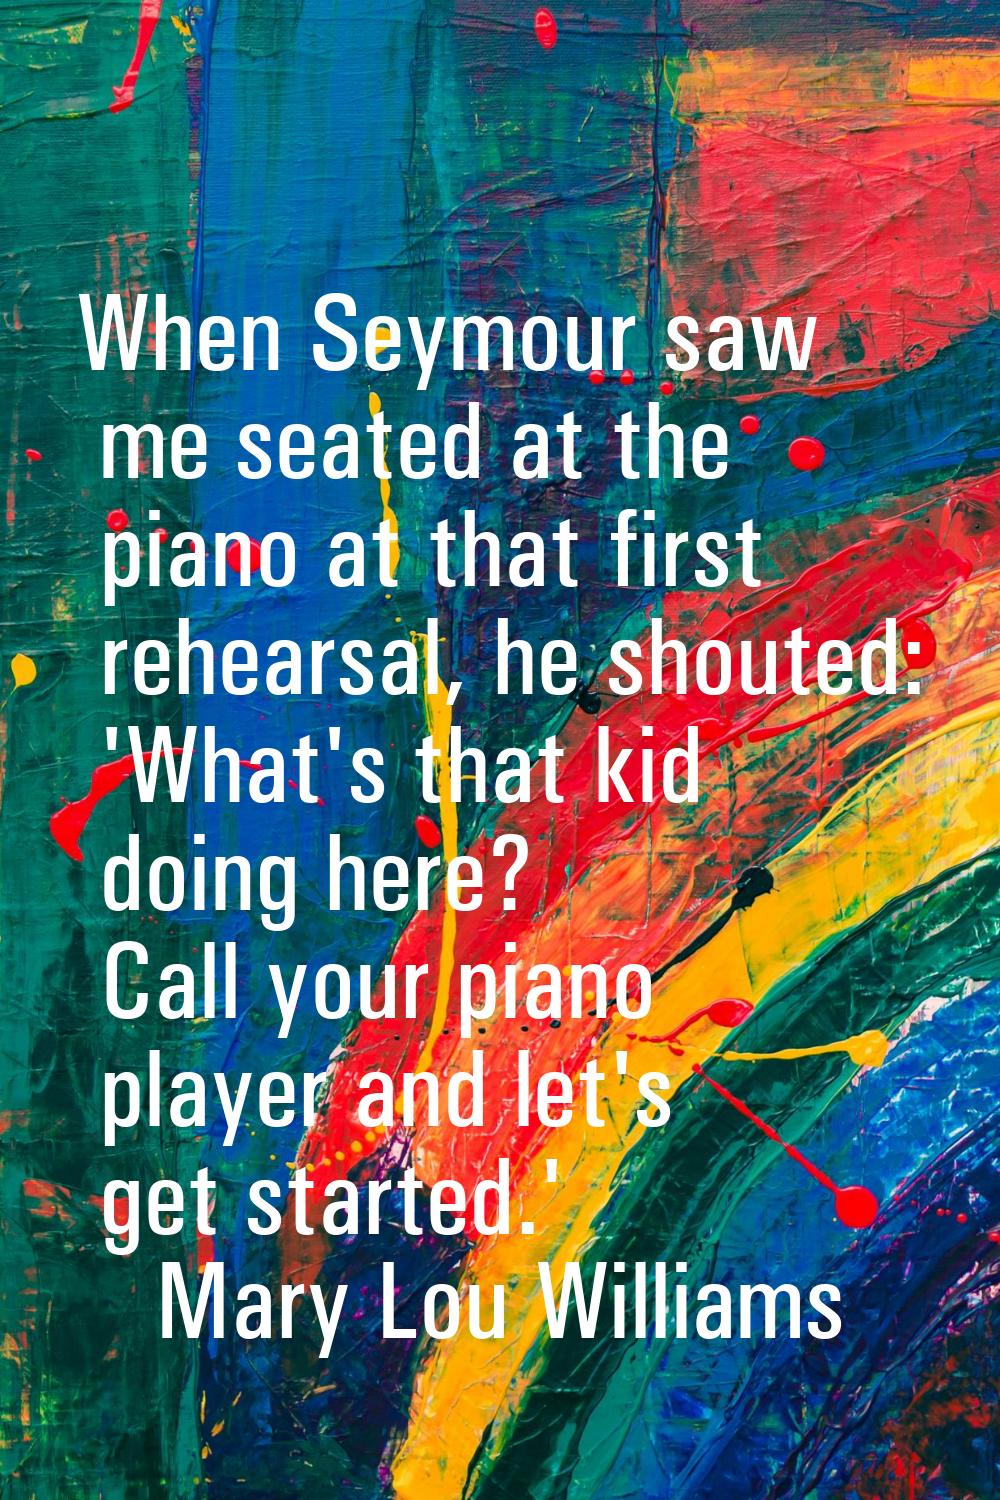 When Seymour saw me seated at the piano at that first rehearsal, he shouted: 'What's that kid doing